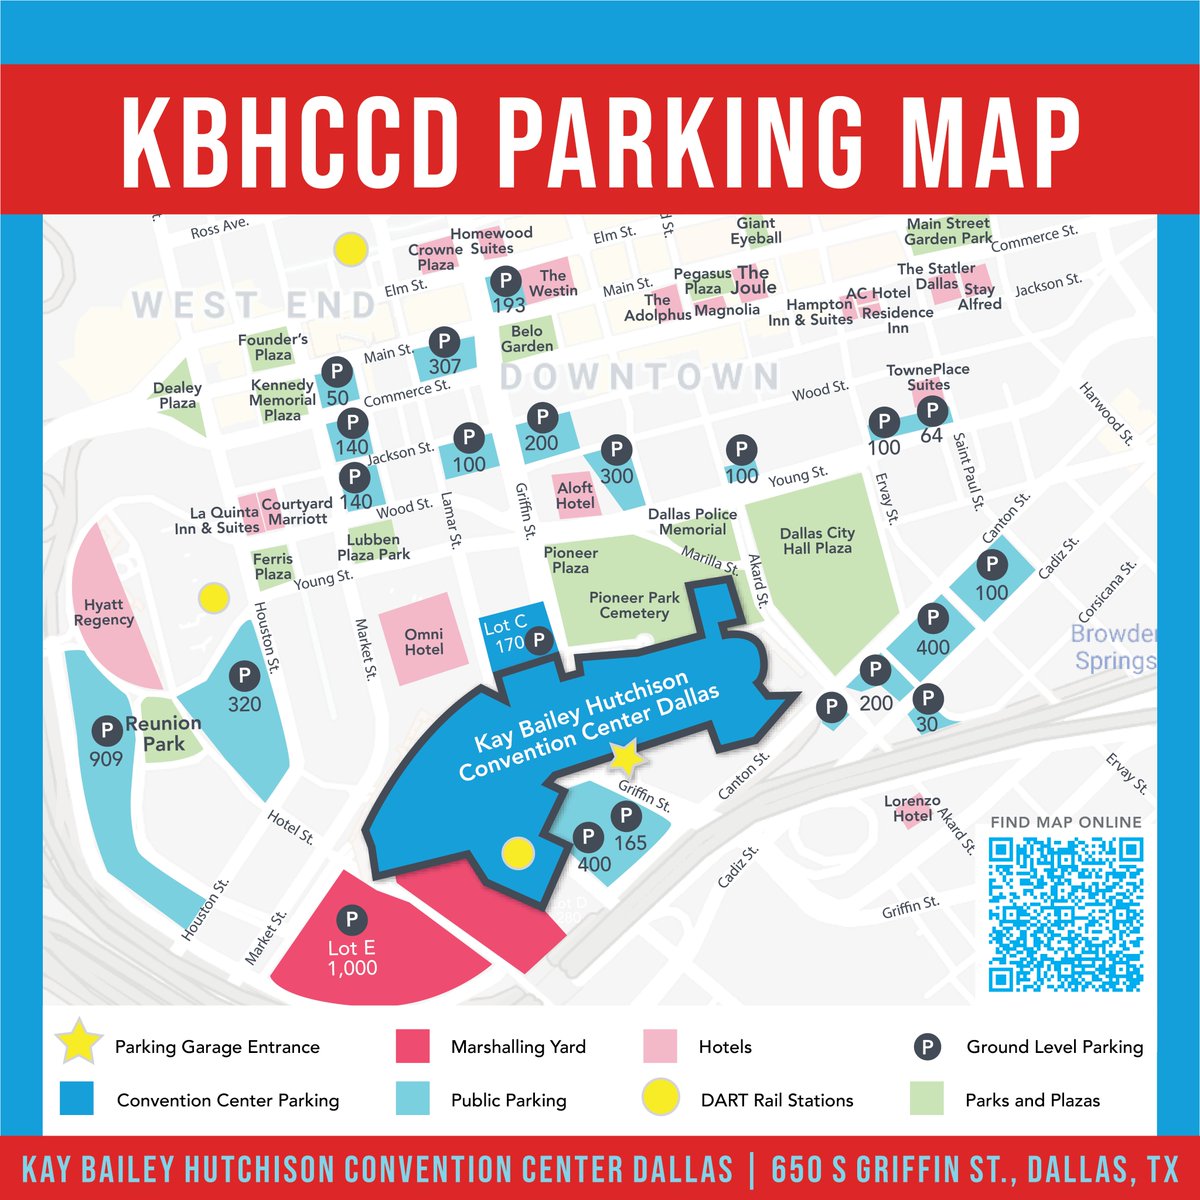 𝗣𝗔𝗥𝗞𝗜𝗡𝗚 – Utilize KBHCCD Surface Lot E (bit.ly/KBHCCDLotE) and surrounding third-party paid parking as shown on the map

𝗥𝗜𝗗𝗘𝗦𝗛𝗔𝗥𝗘 – Utilize Uber and Lyft, with drop-off at Lower C Driveway (bit.ly/KBHCCDLowerC)

#𝘕𝘙𝘈𝘈𝘔 #𝘕𝘙𝘈 (2/3)